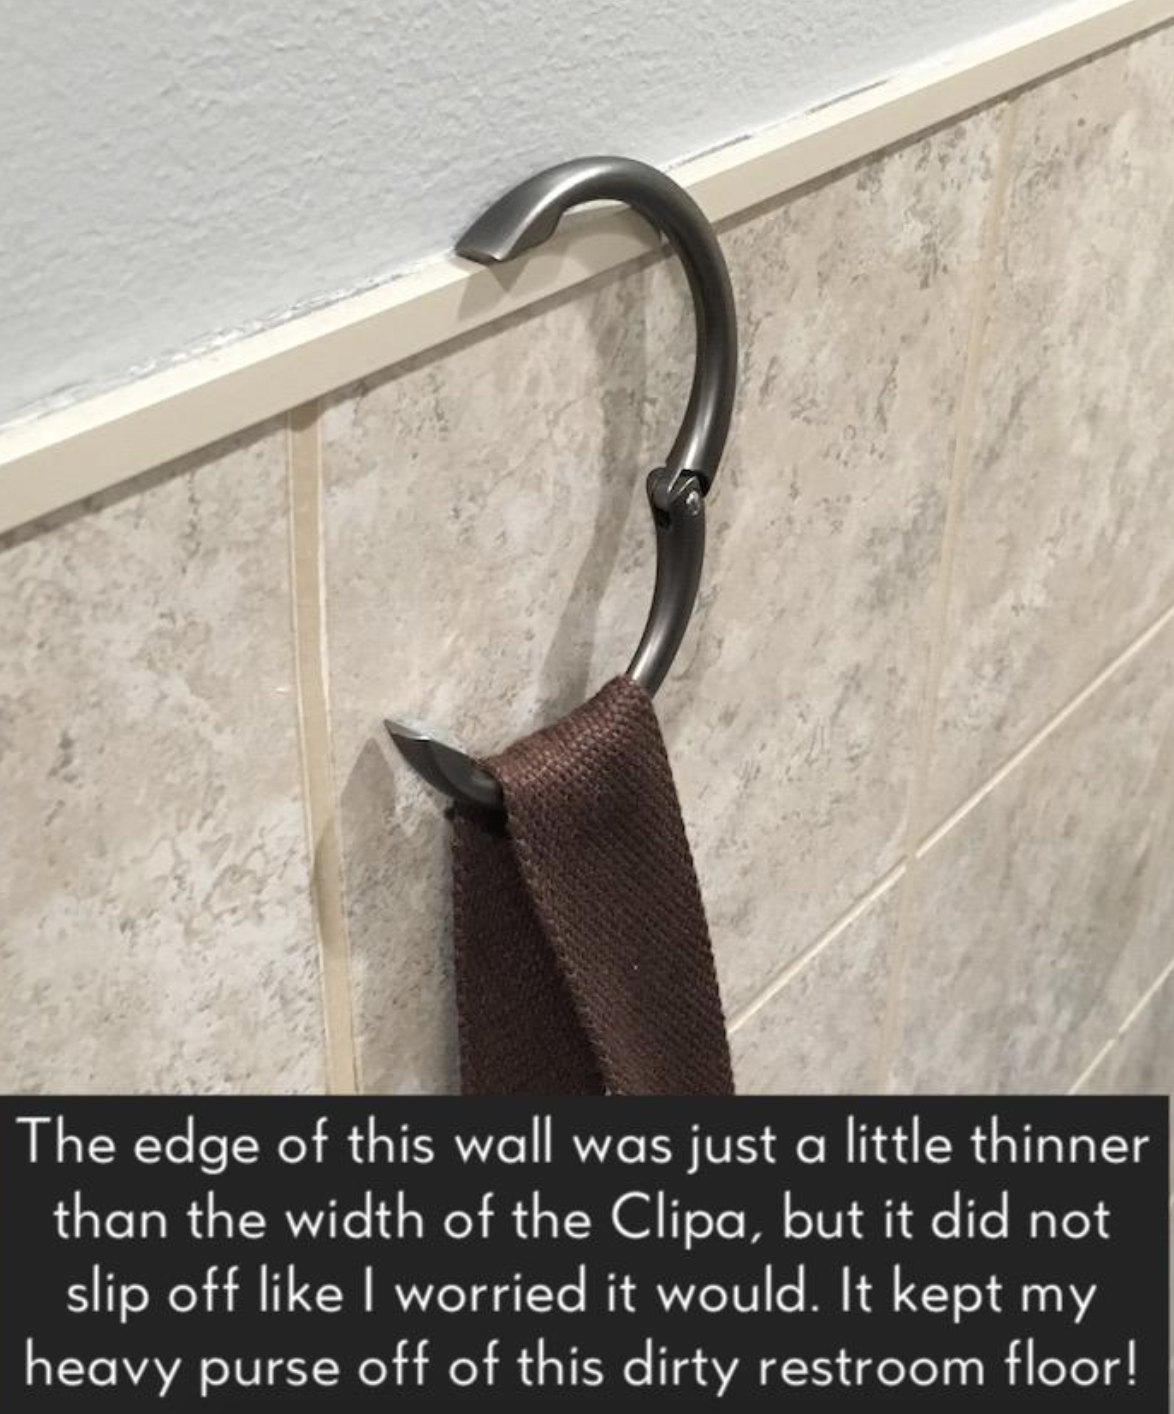 reviewer image of the clip hanging on a thin narrow edge in public restroom, holding a purse